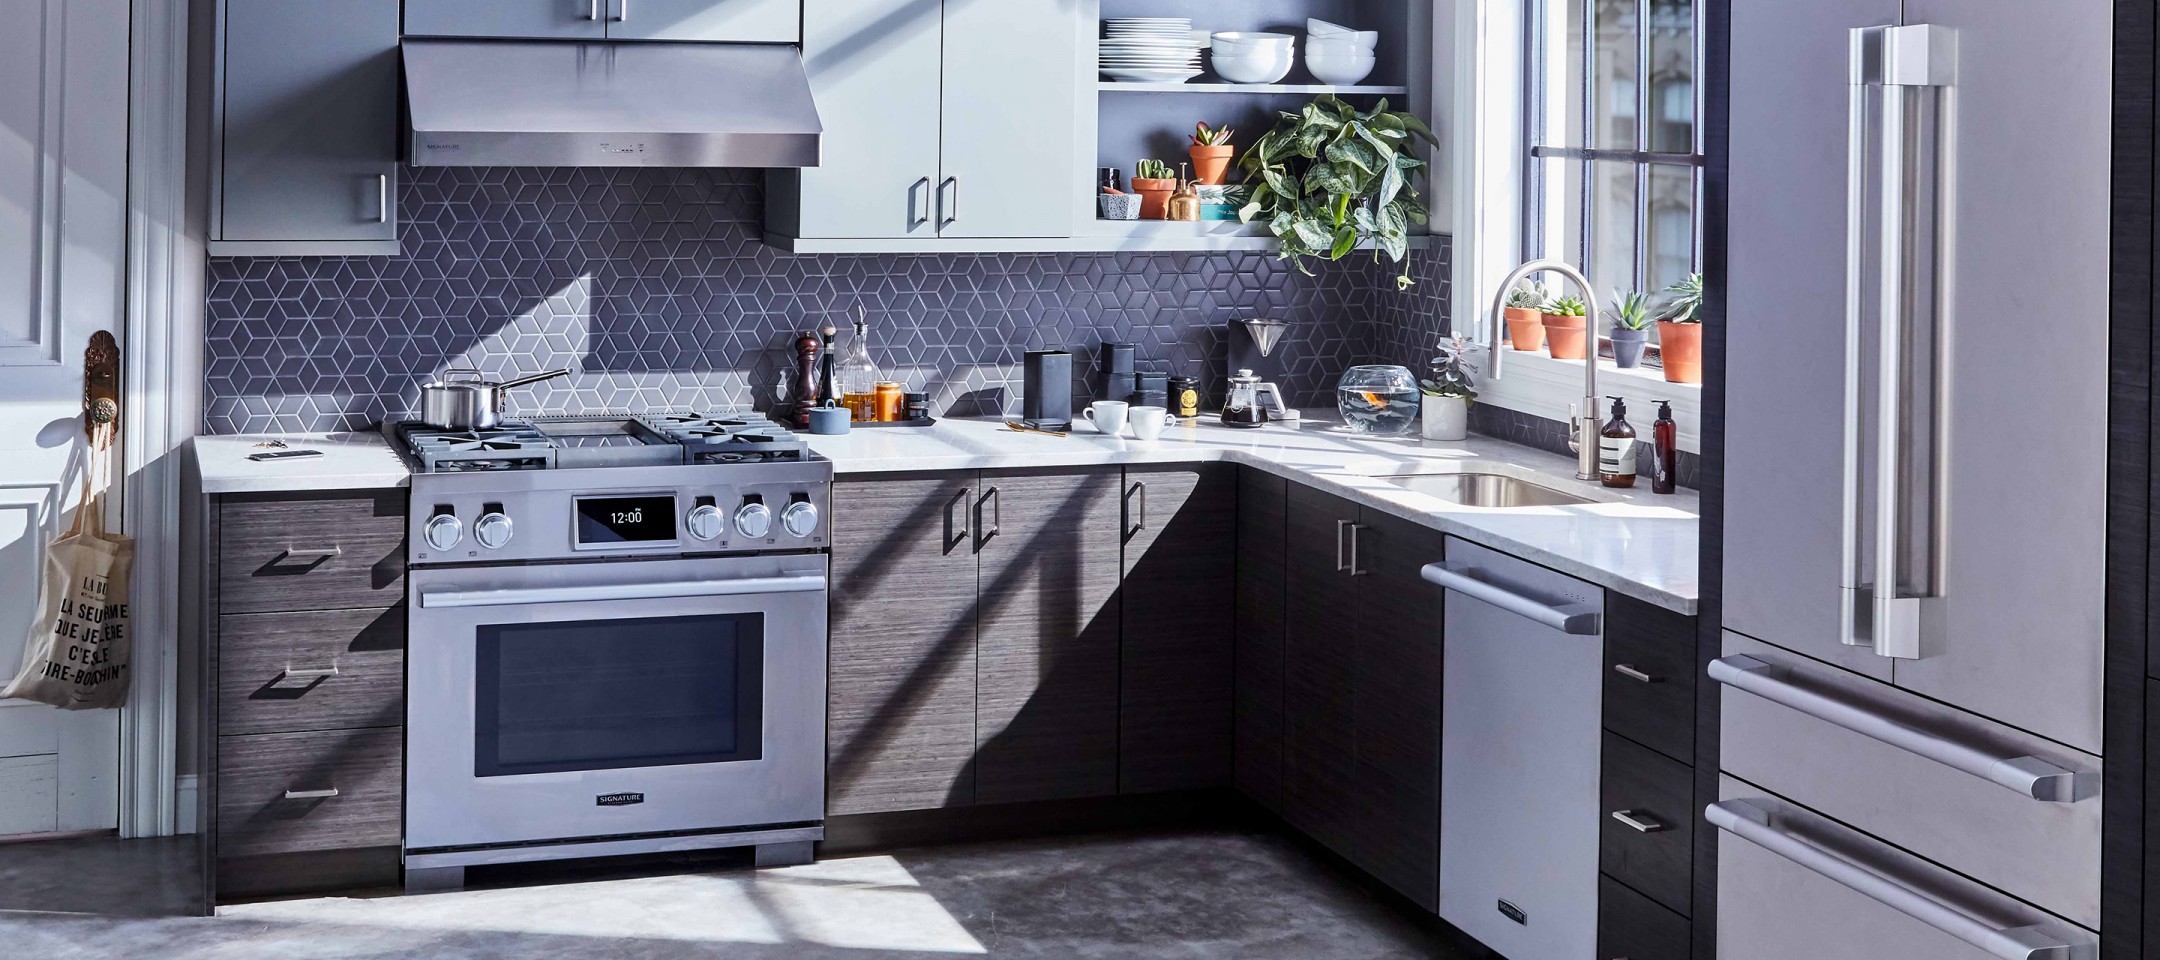 5 Cool Kitchen Appliances that Make Your Life Easier